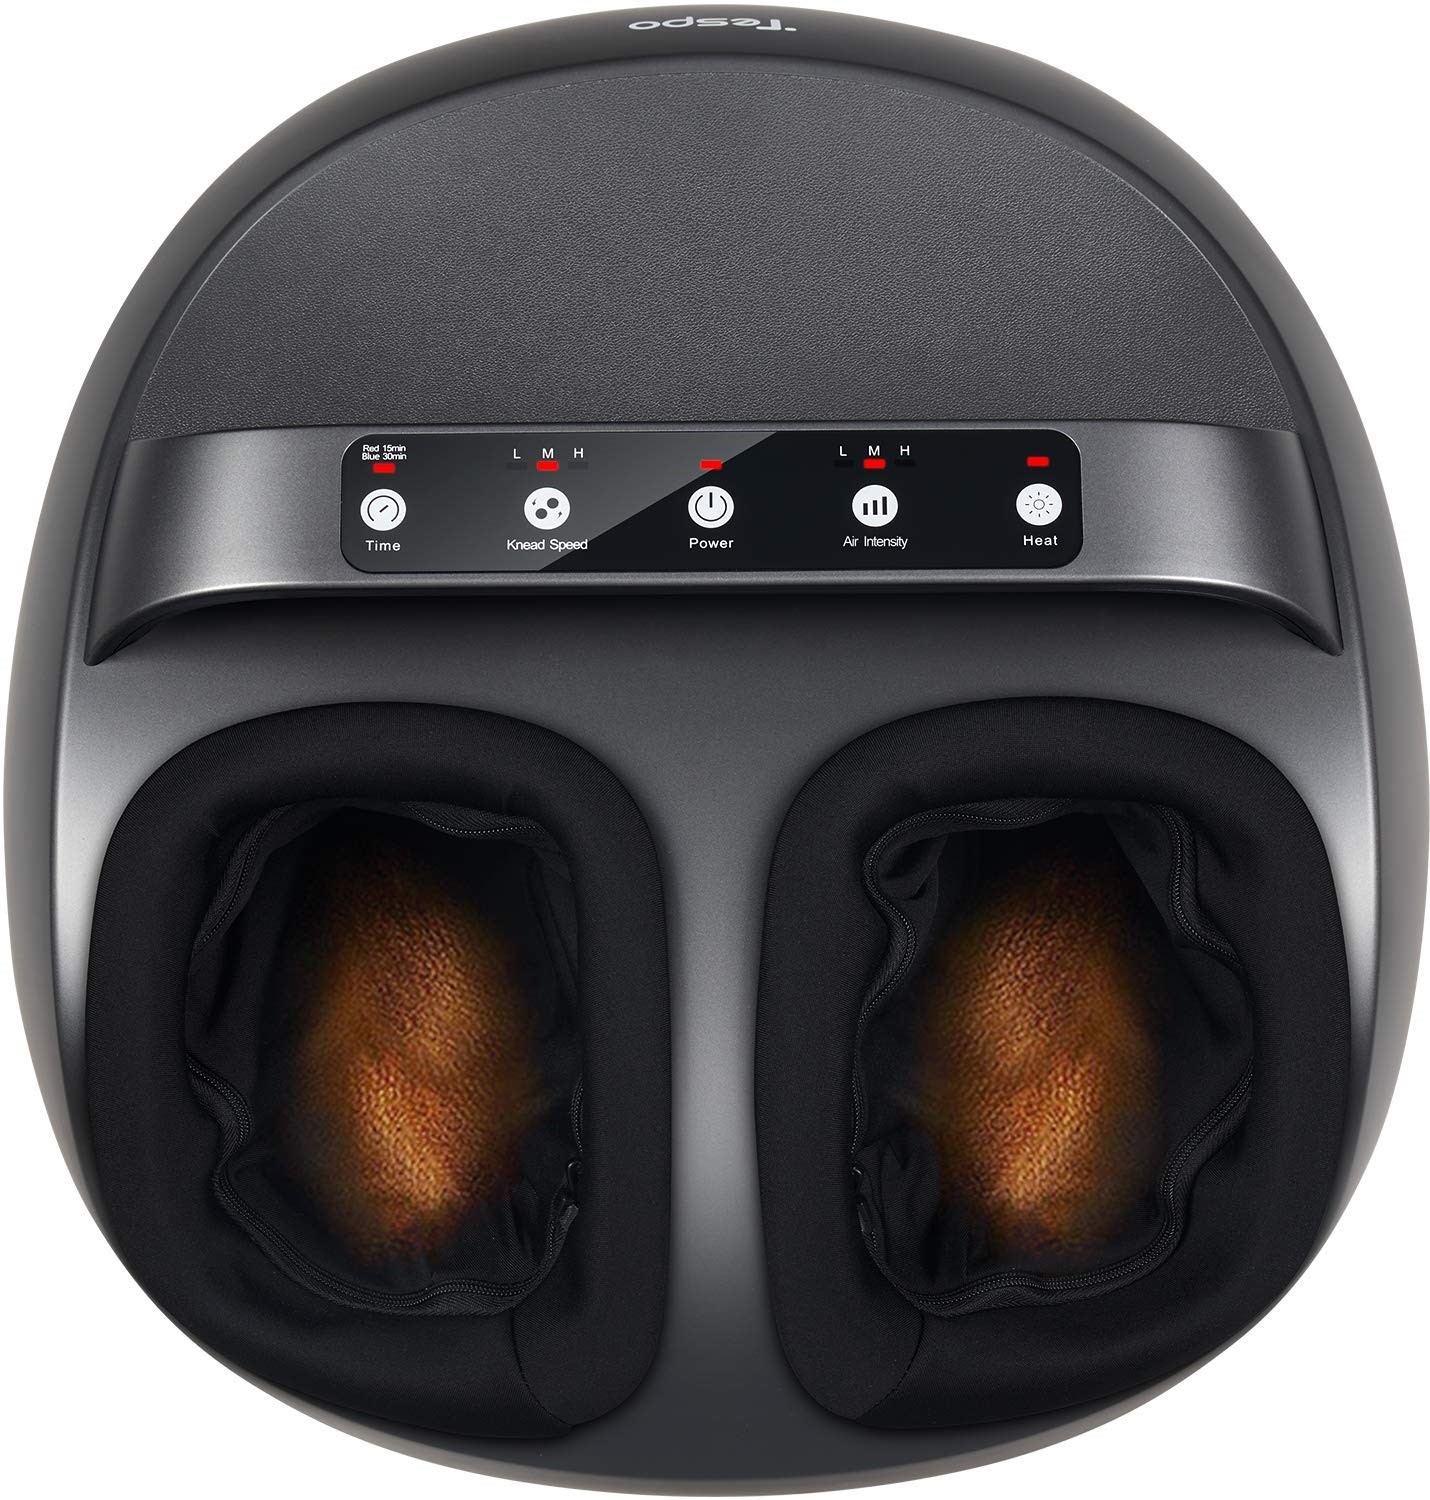 Top view of black, rounded machine with a row of buttons across the top and spaces to insert feet below.